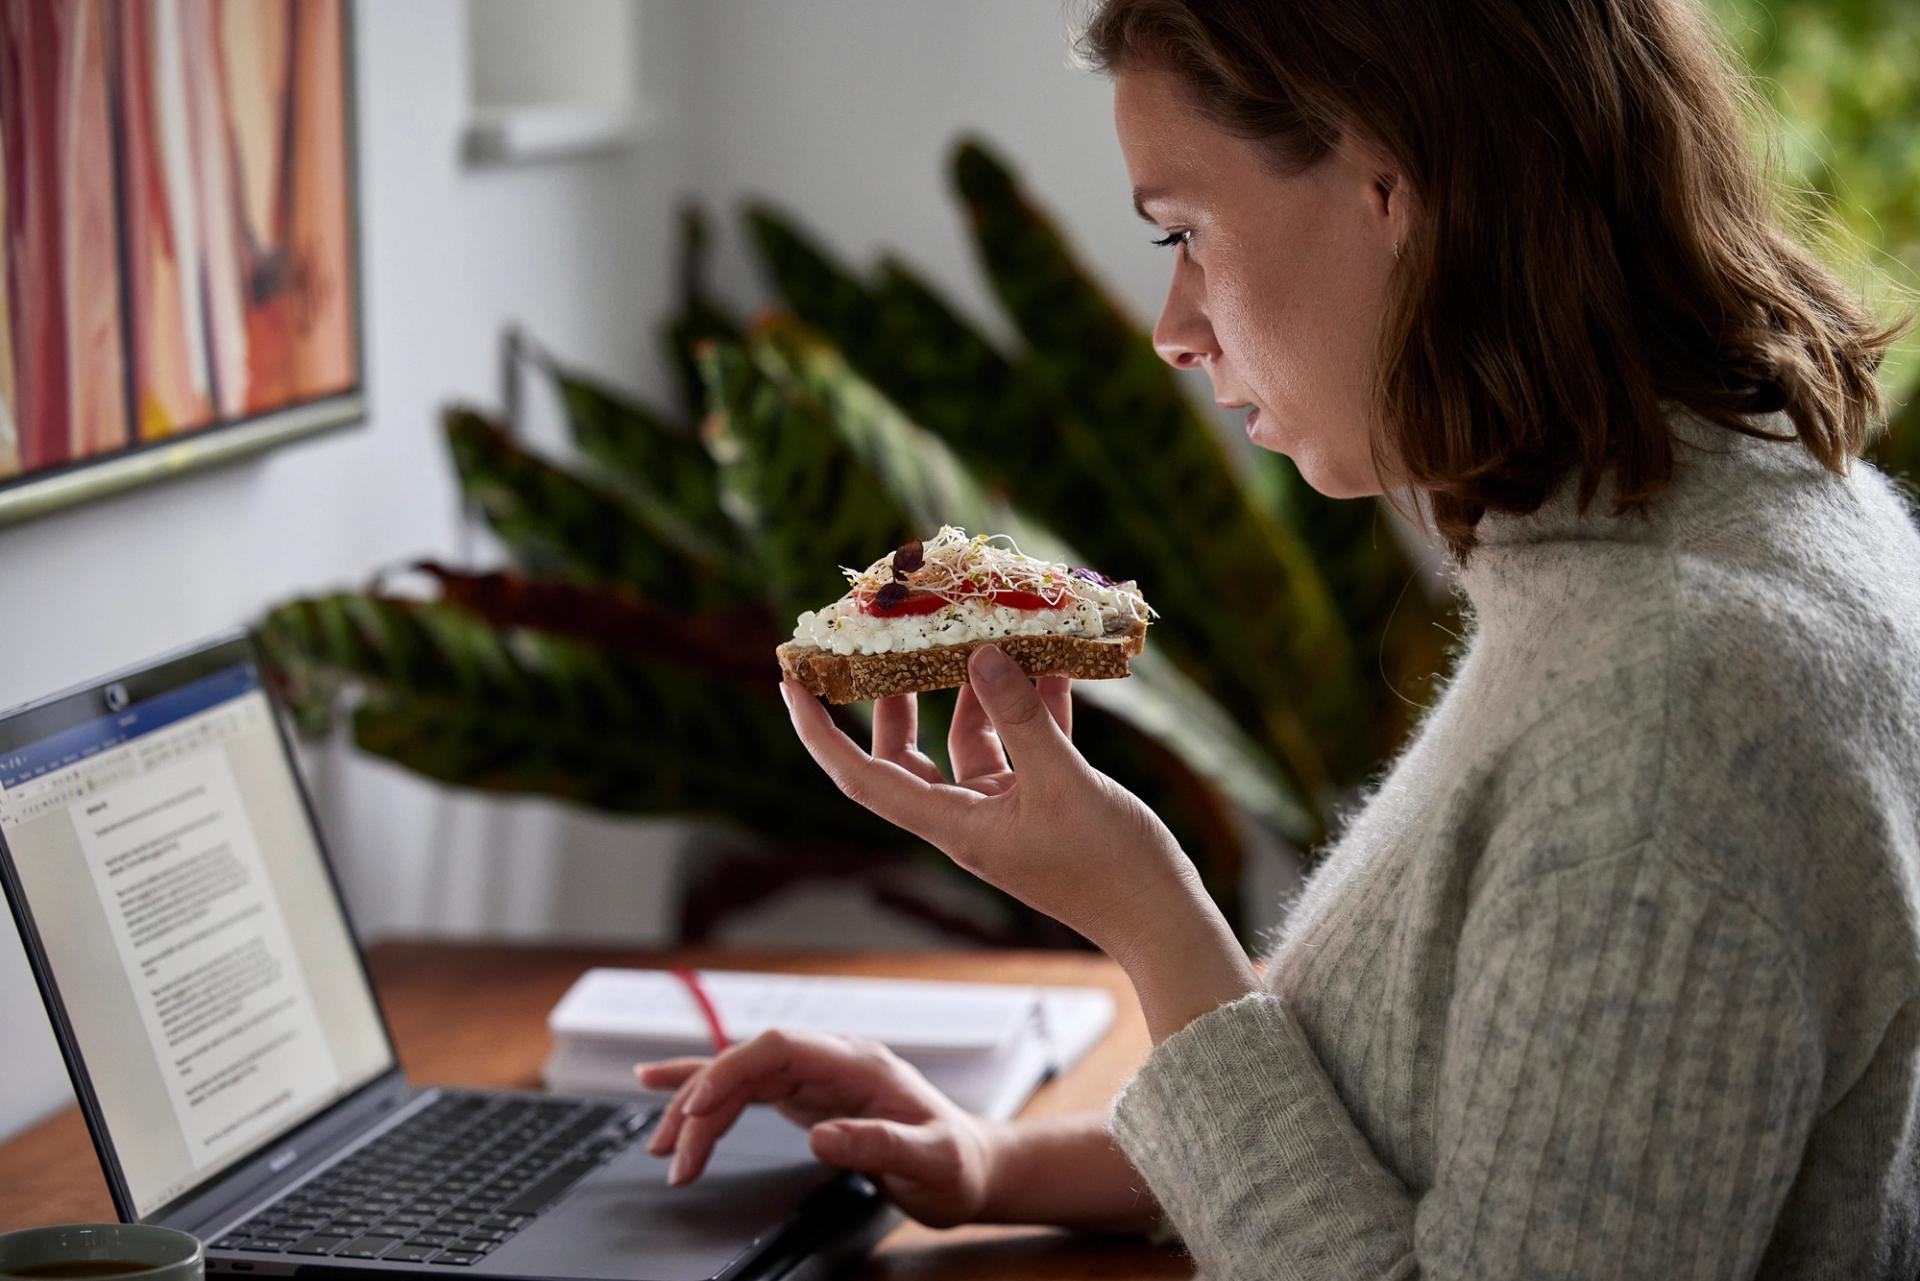 a woman is eating a sandwich while using a laptop computer .